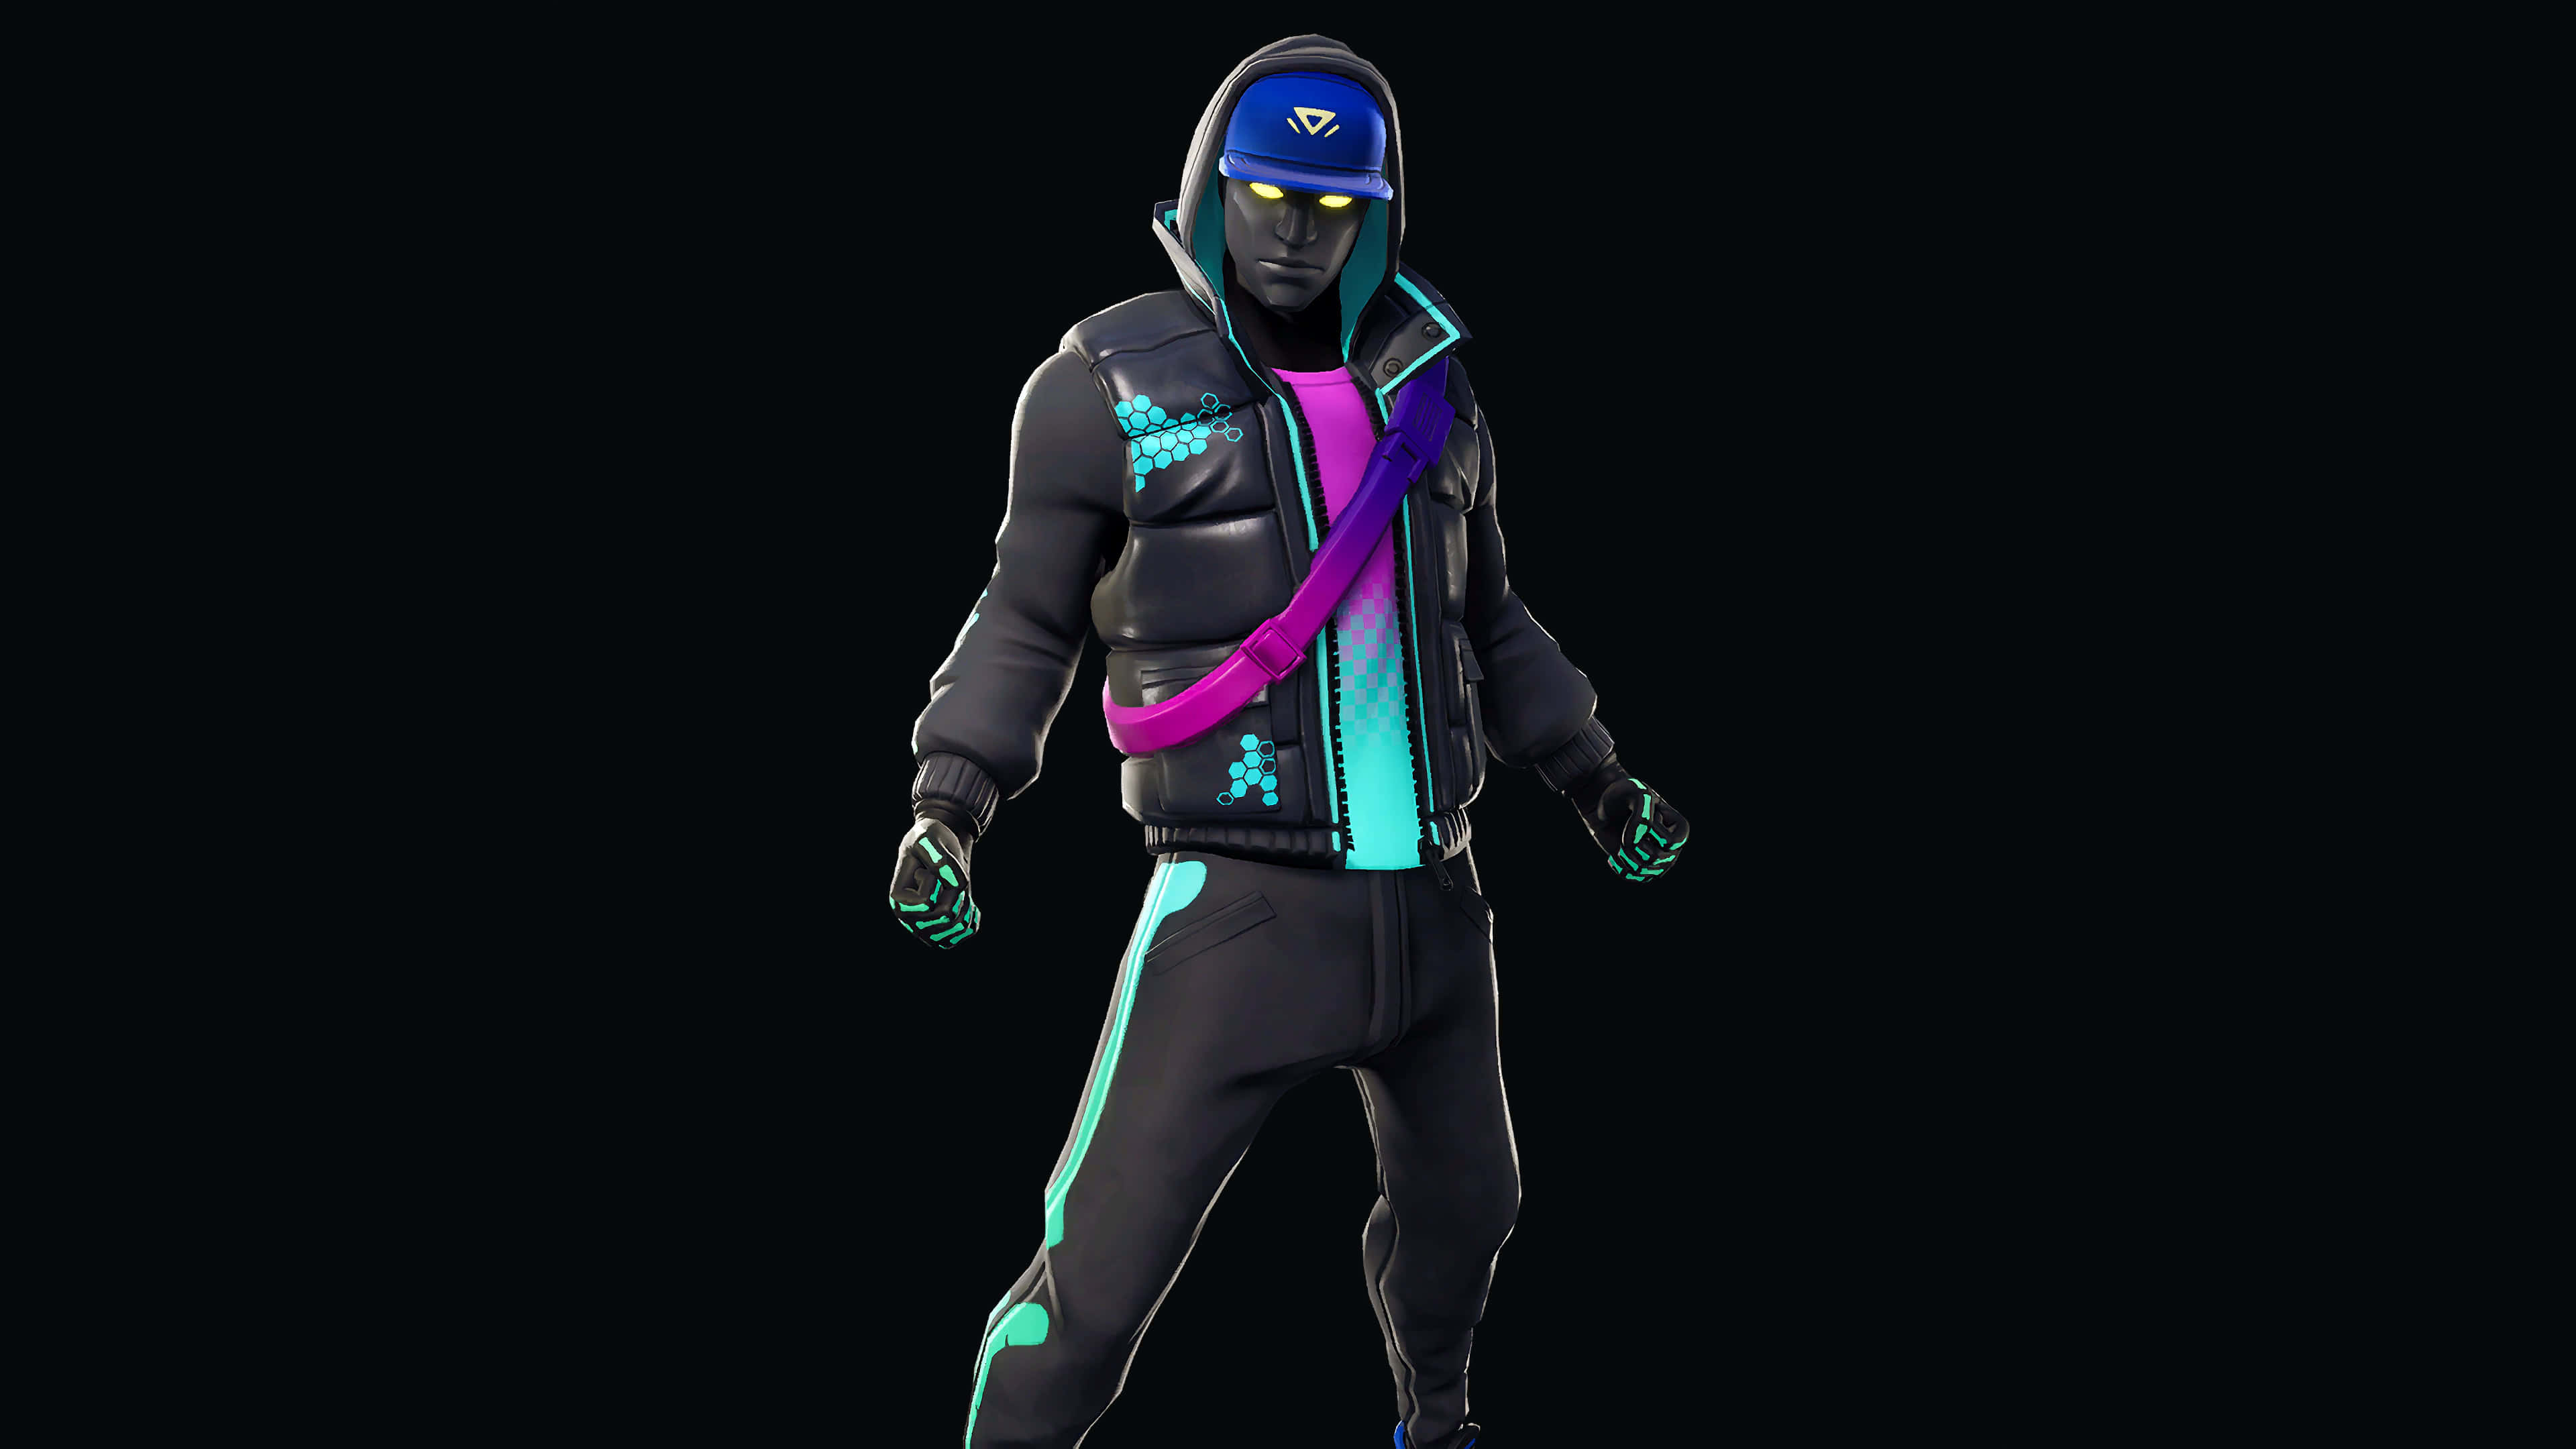 Fortnite cryptic set cryptic skin outfit uhd k wallpaper